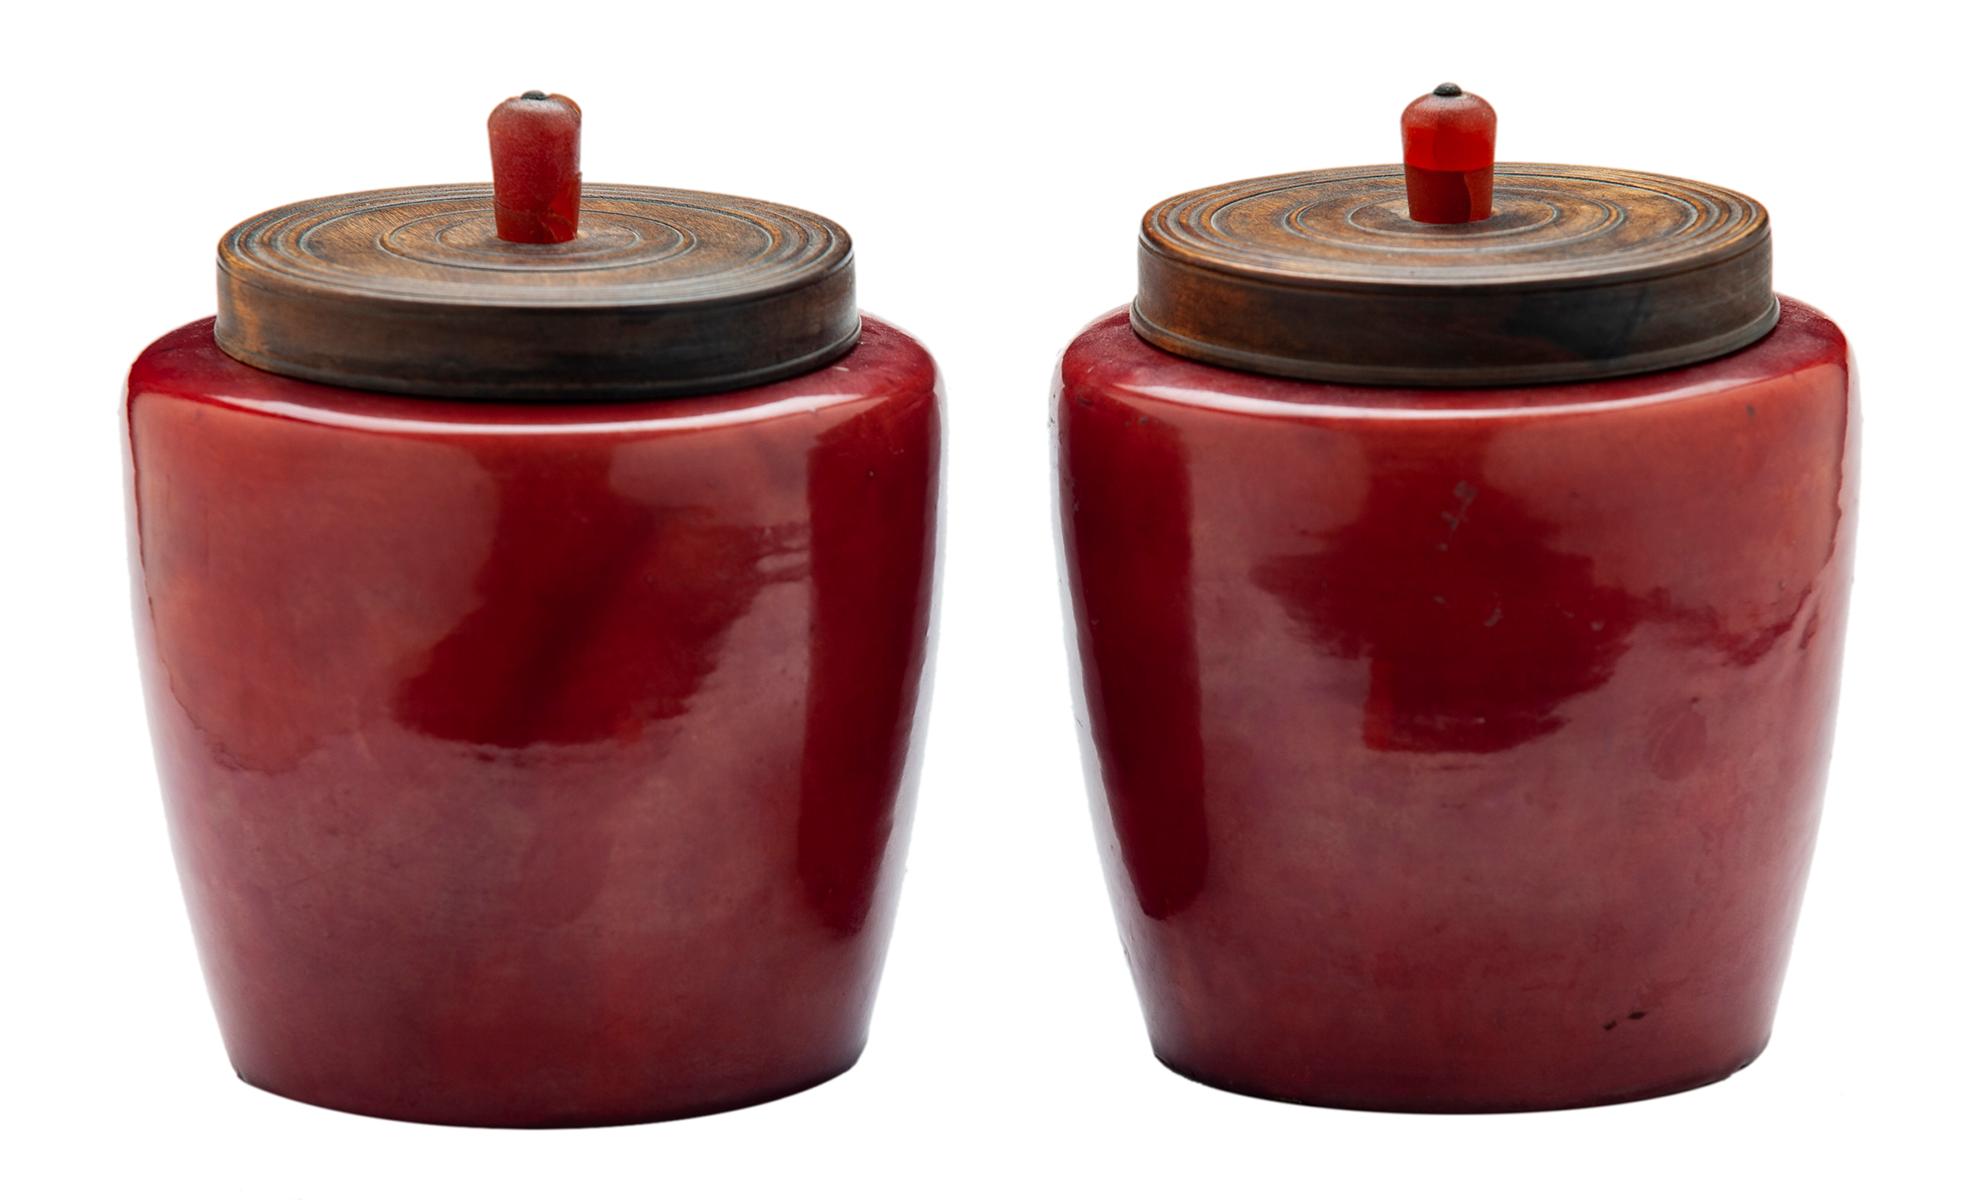 These antique Awaji jars have a deep burgundy color with a beautiful translucence created by such high temperatures during firing, that it borders on stoneware. The interior brush markings are the unique intention of the artist and are silvery in